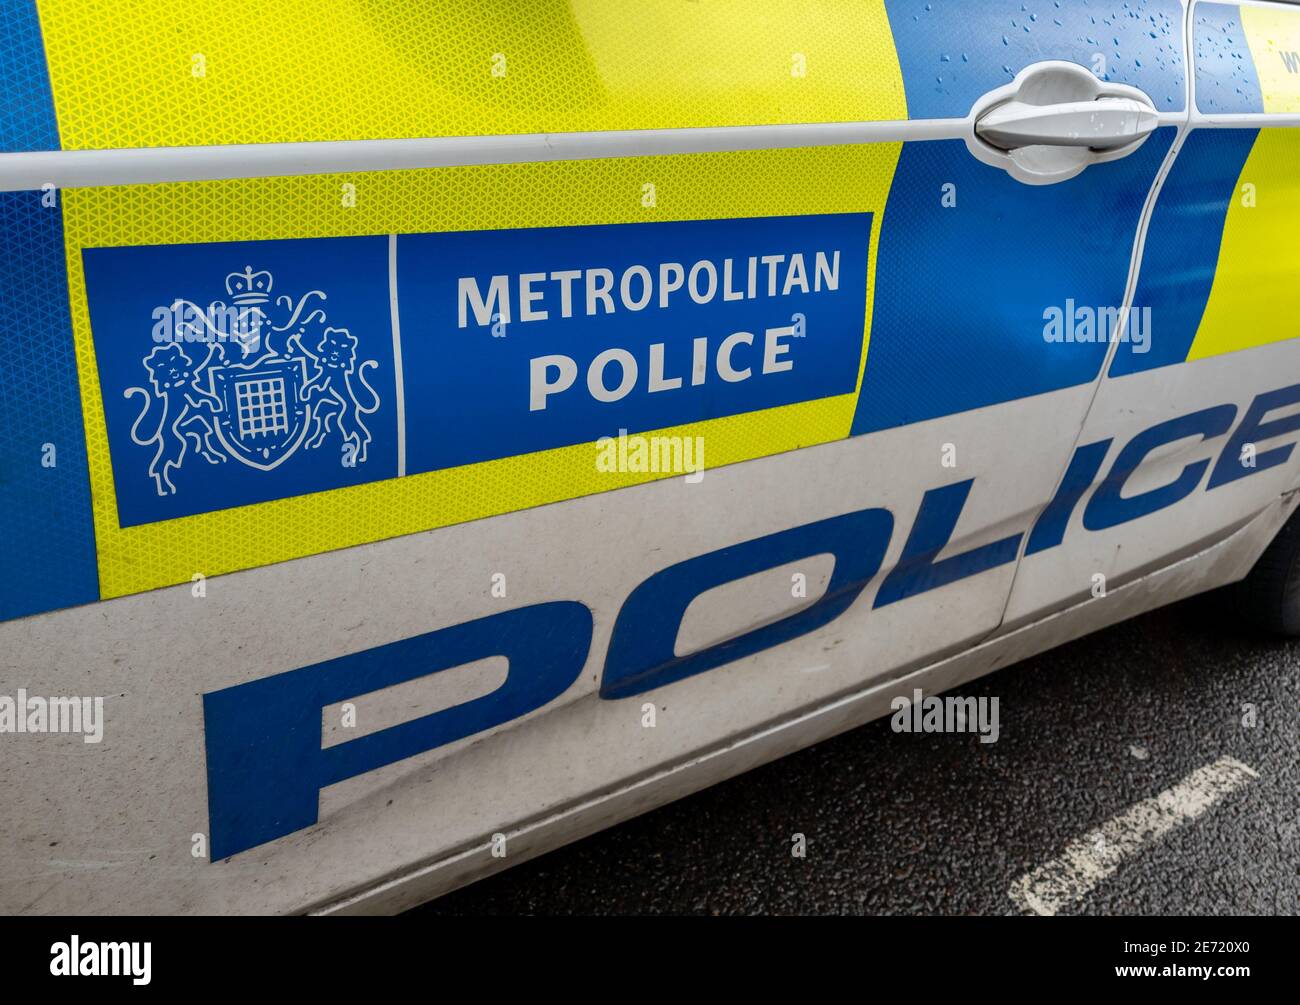 A Metropolitan Police vehicle with police marking on side. Stock Photo